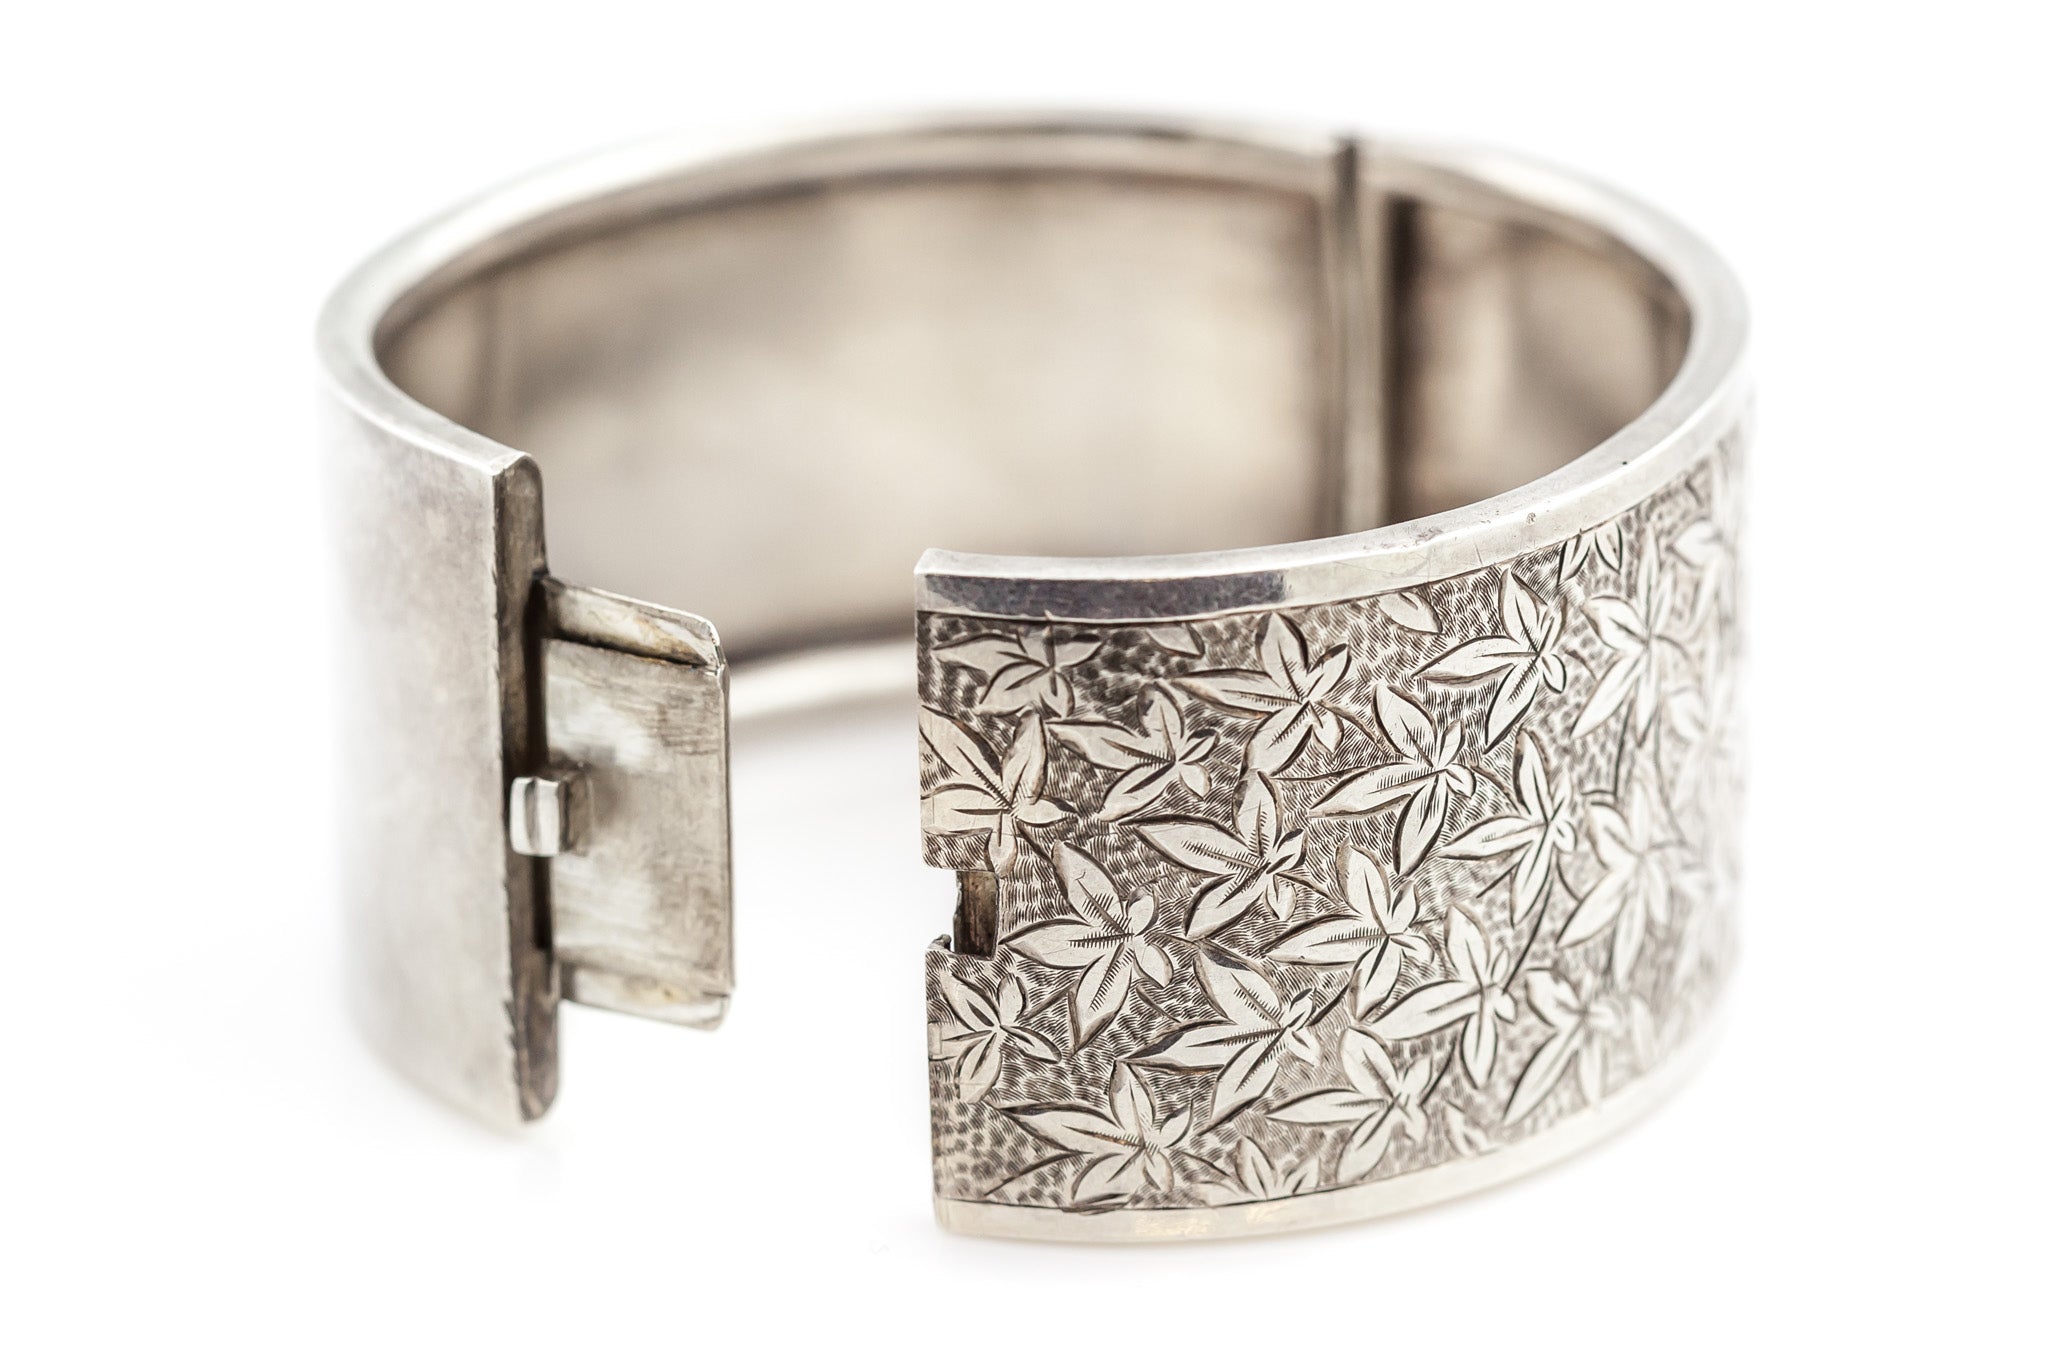 Personalised Wide Silver Hammered Cuff Bracelet By Studio on Stirling   notonthehighstreetcom